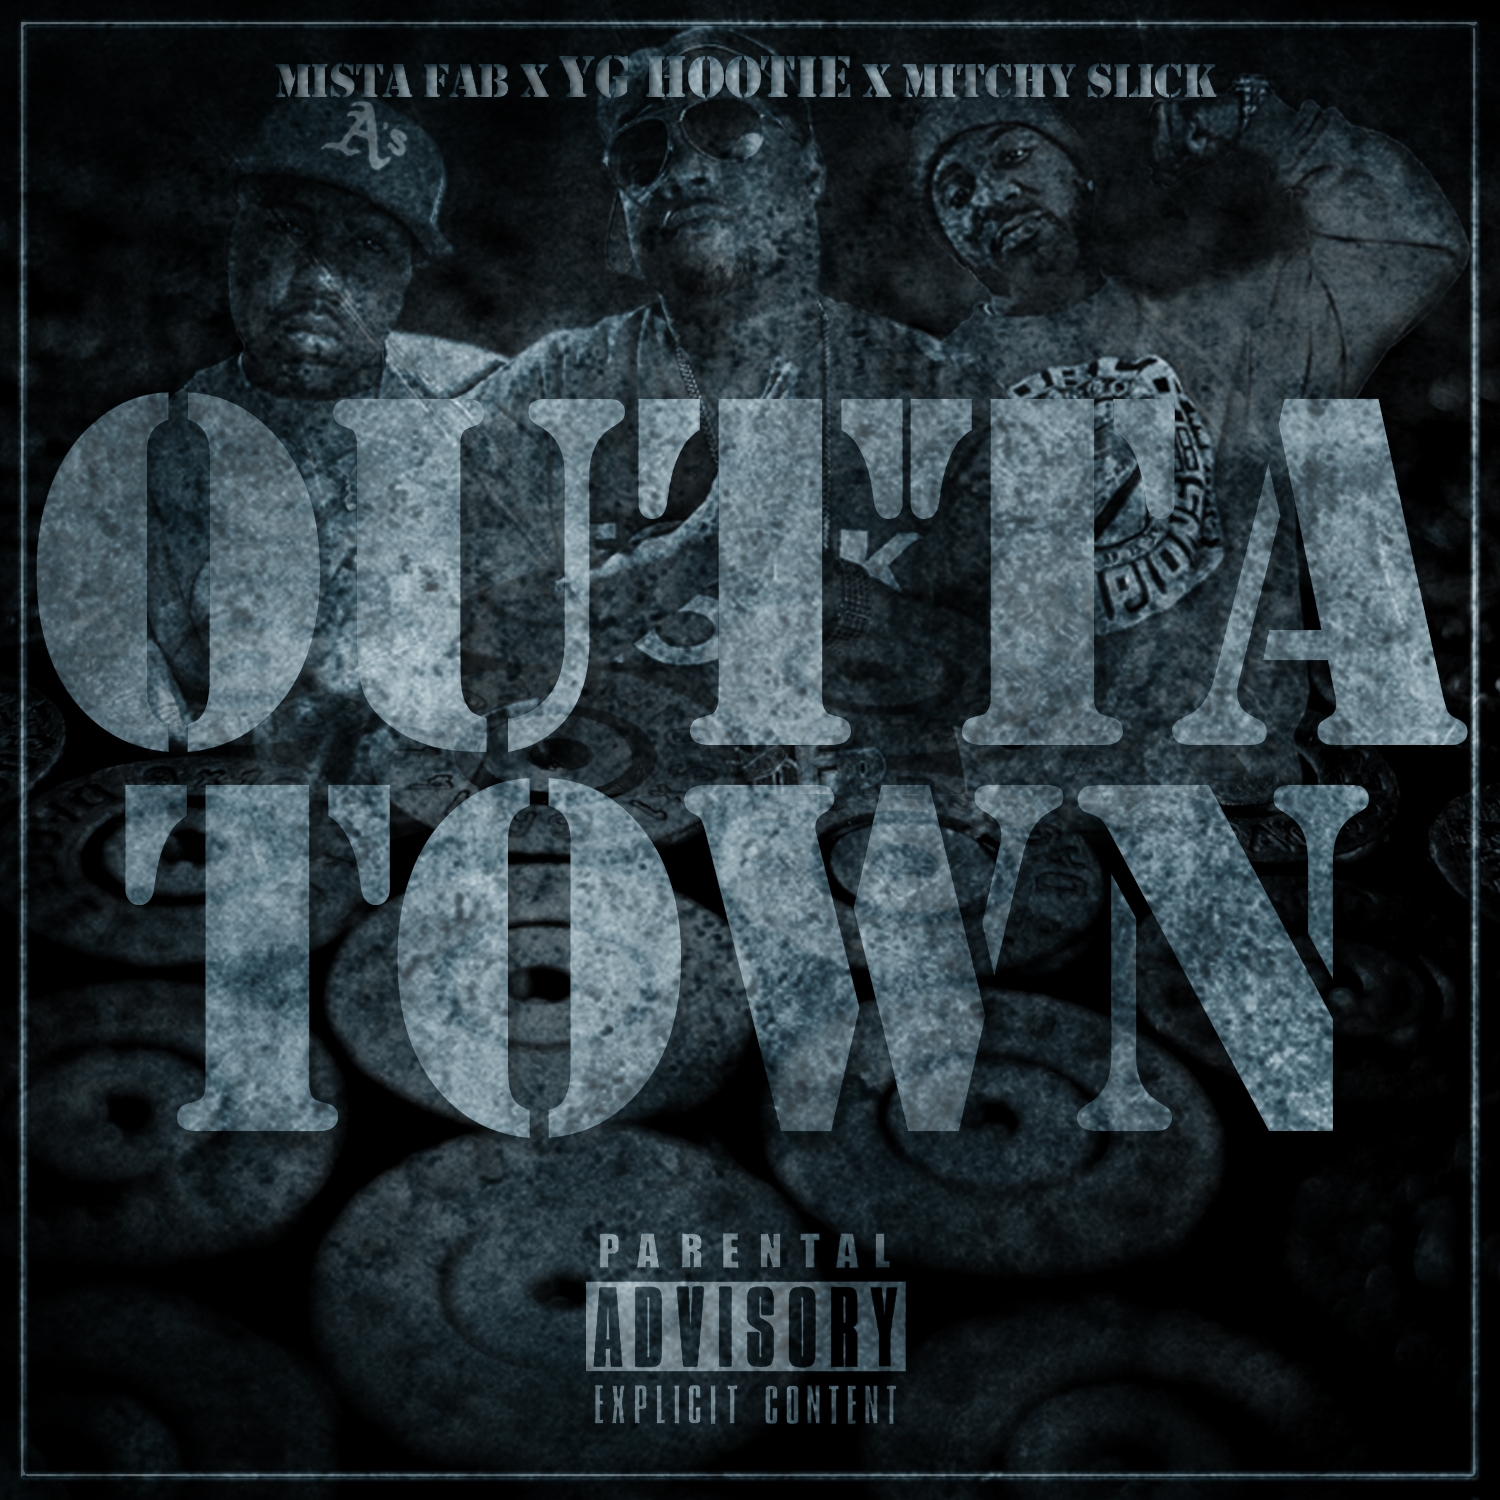 Outta Town (feat. Mitchy Slick & Mistah F.A.B.) - Single